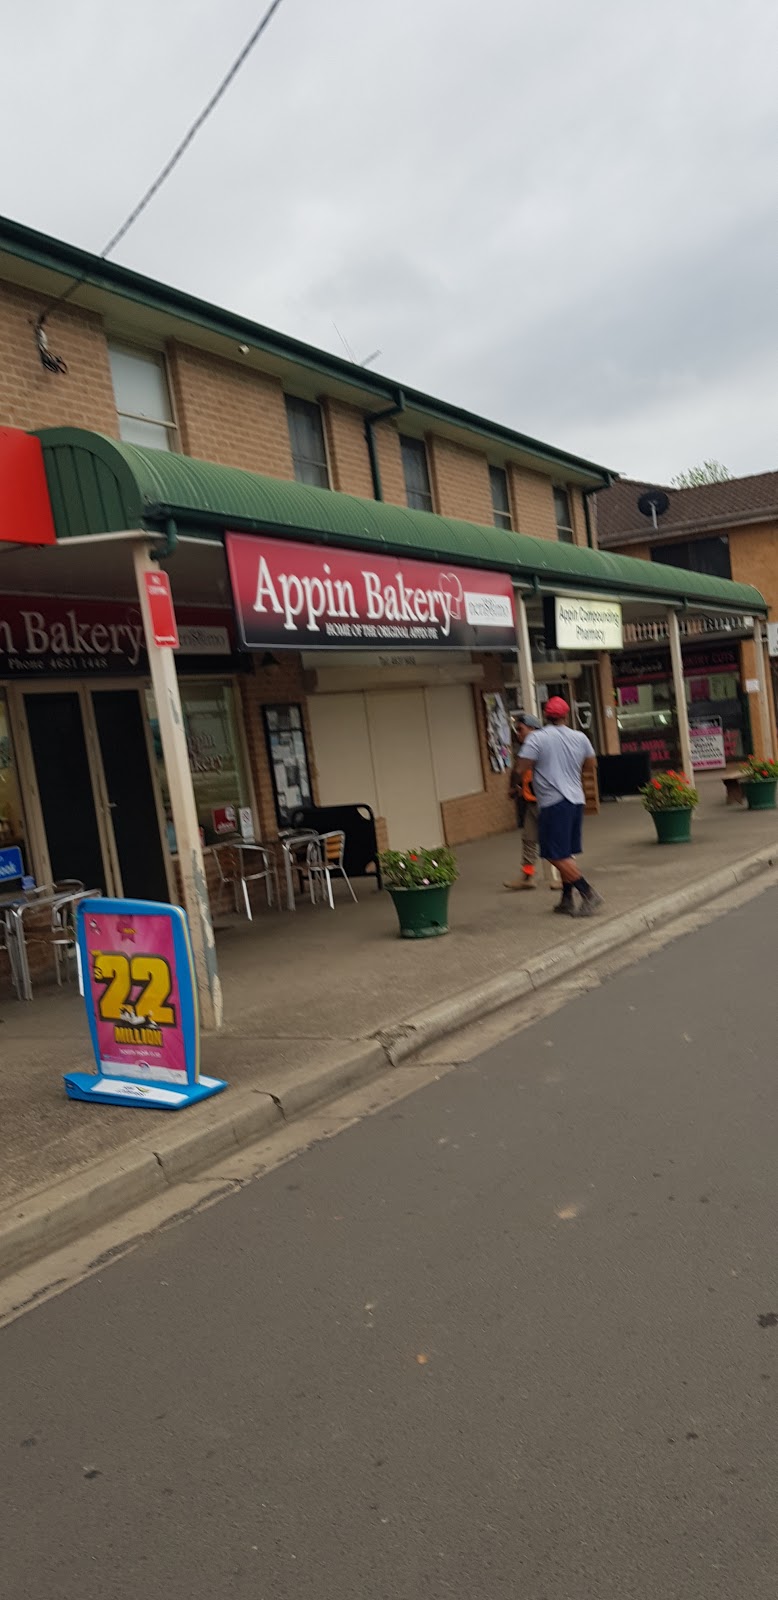 Appin Bakery | bakery | Appin NSW 2560, Australia | 0246311448 OR +61 2 4631 1448